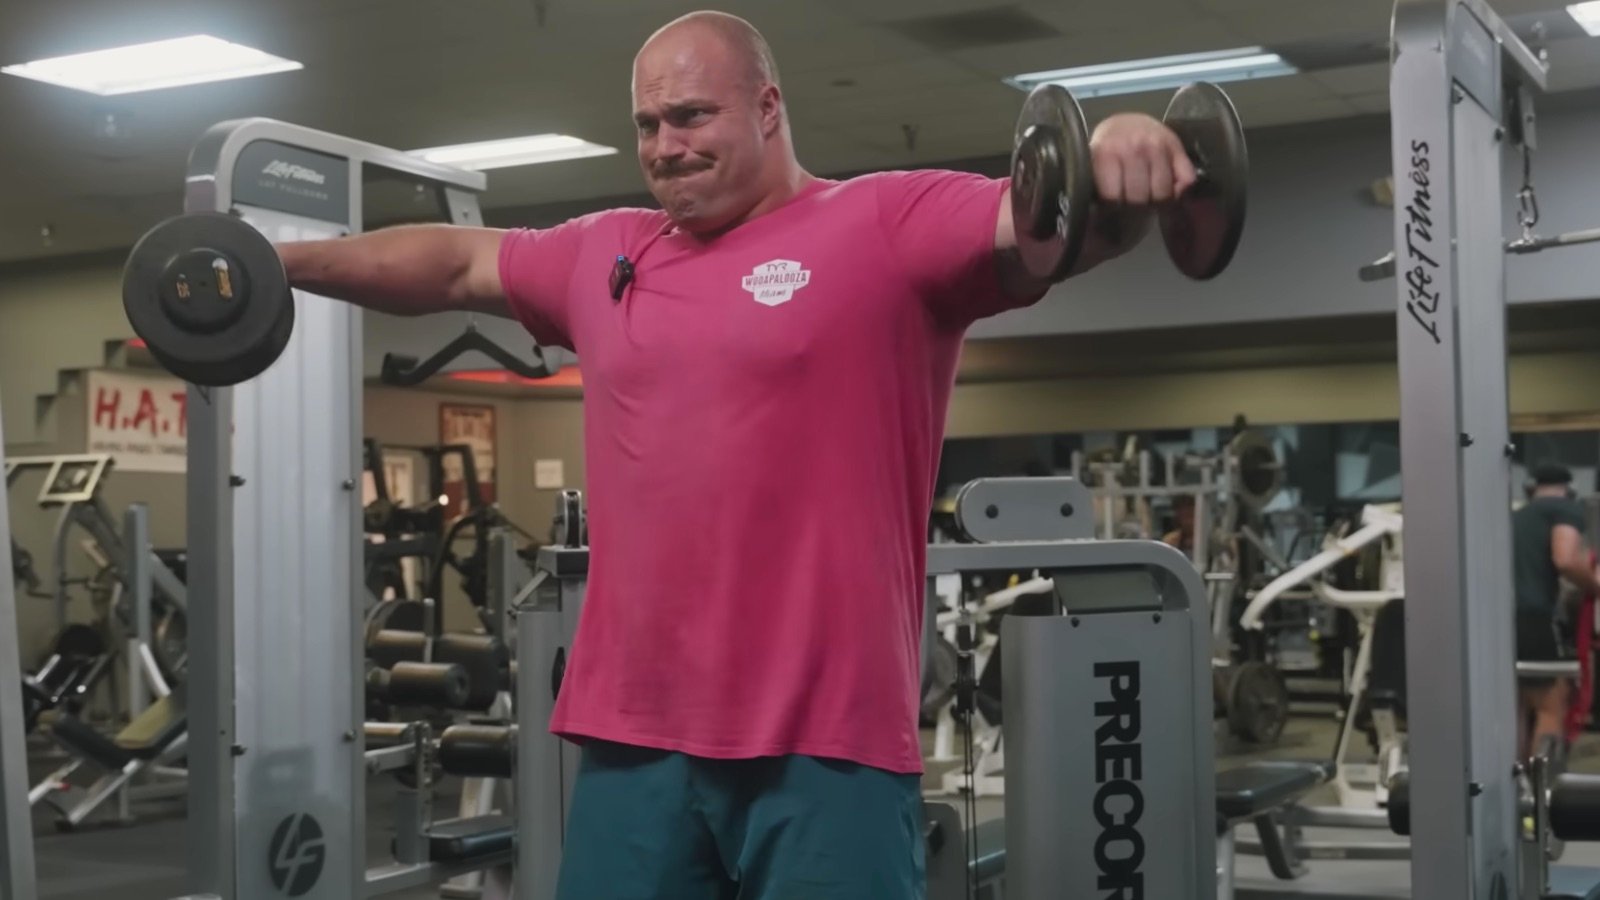 mitchell-hooper-crushes-his-first-workout-as-the-world's-strongest-man-–-breaking-muscle